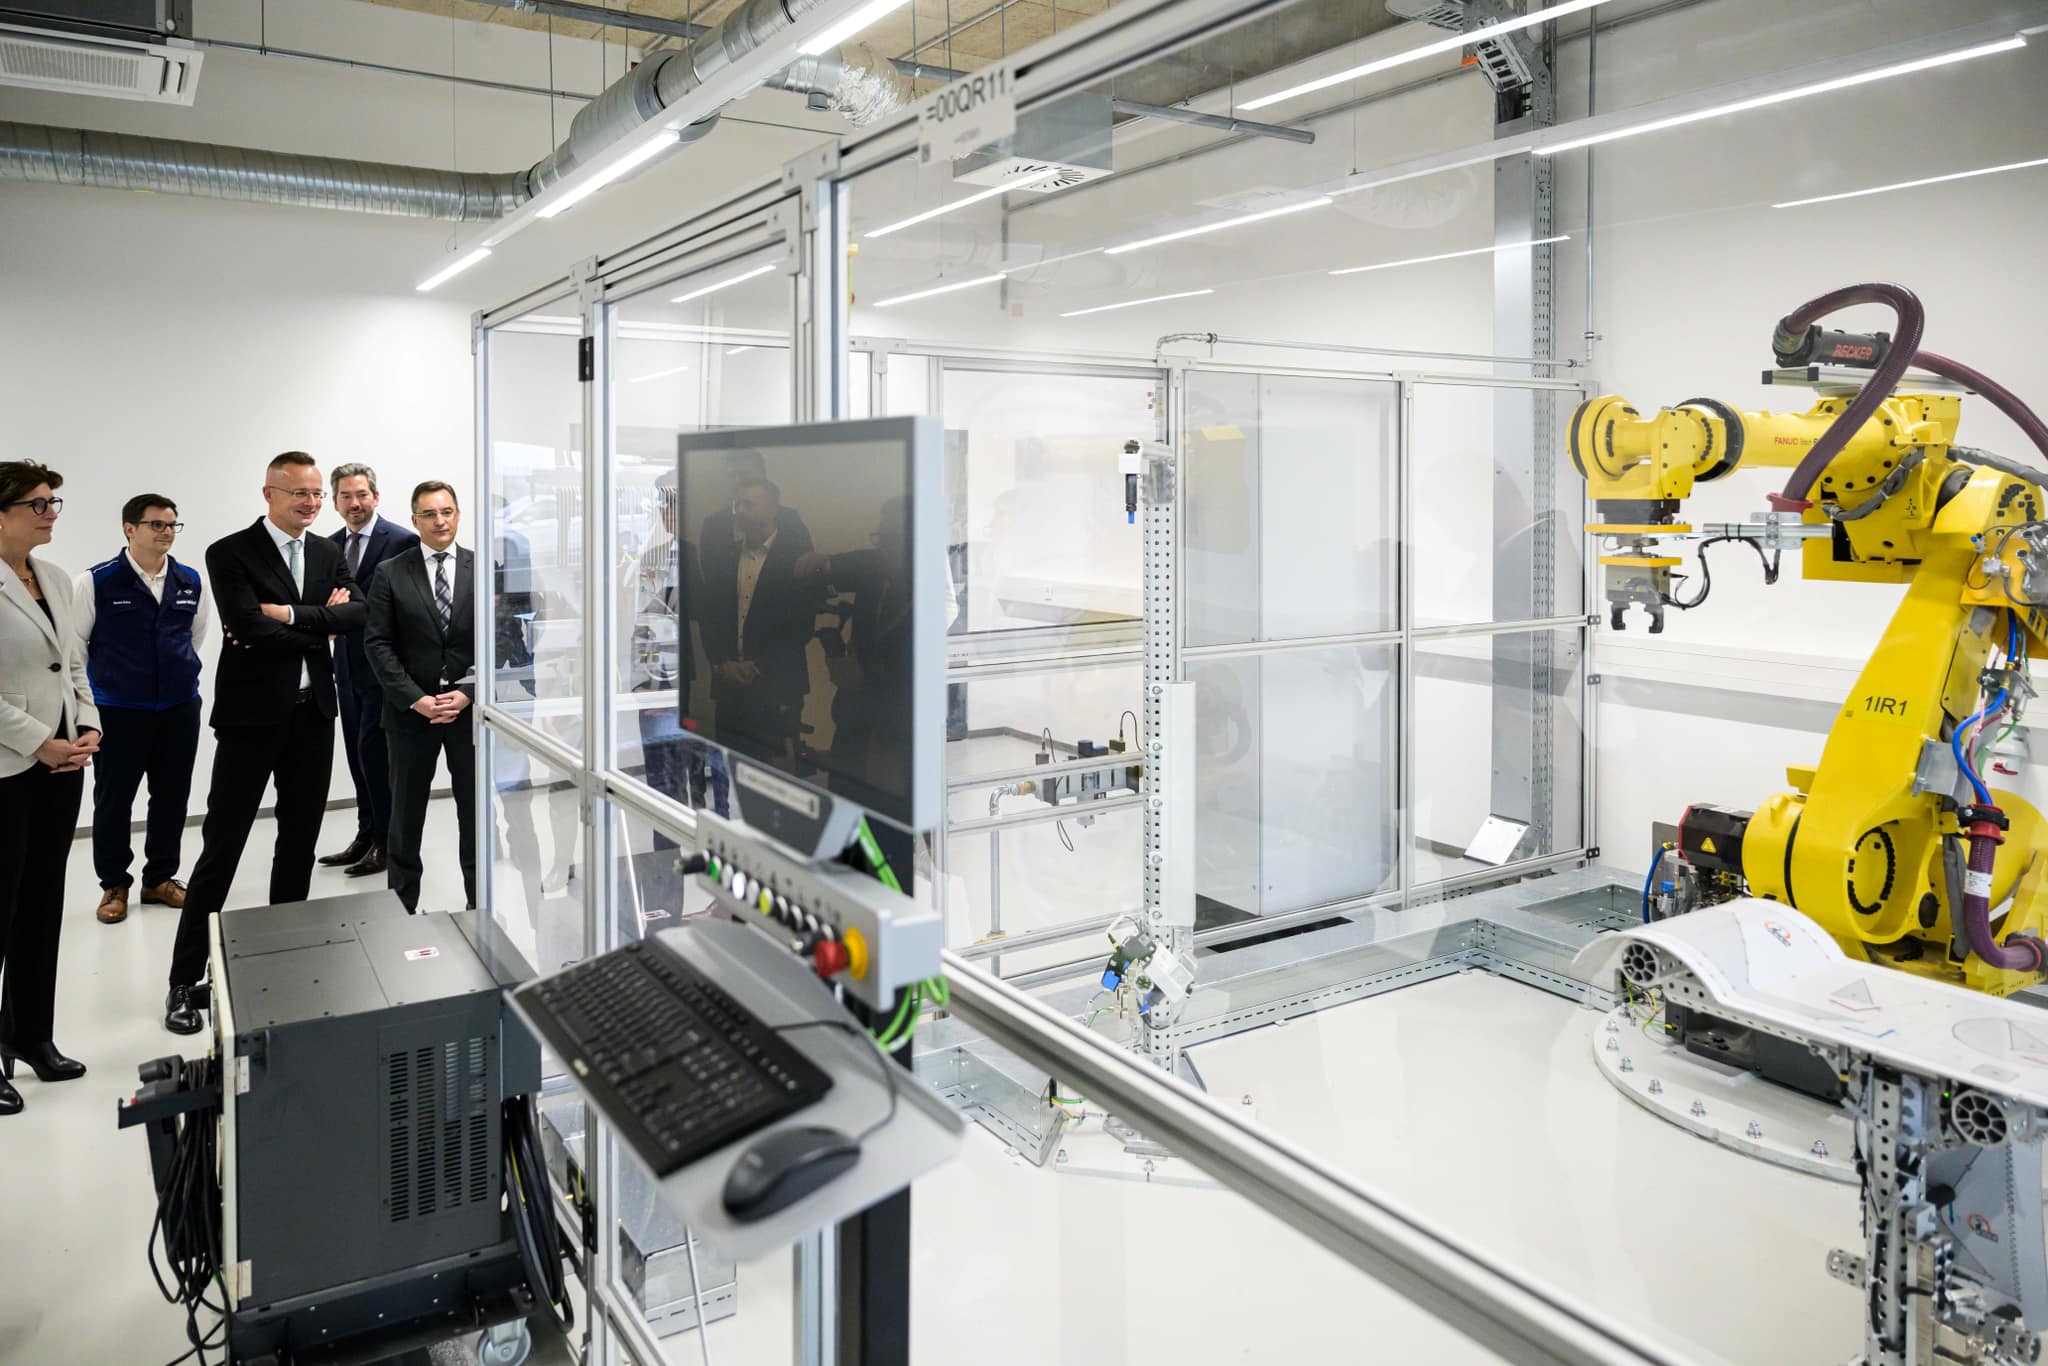 Cutting-edge Technology Arrives at the Debrecen BMW Factory